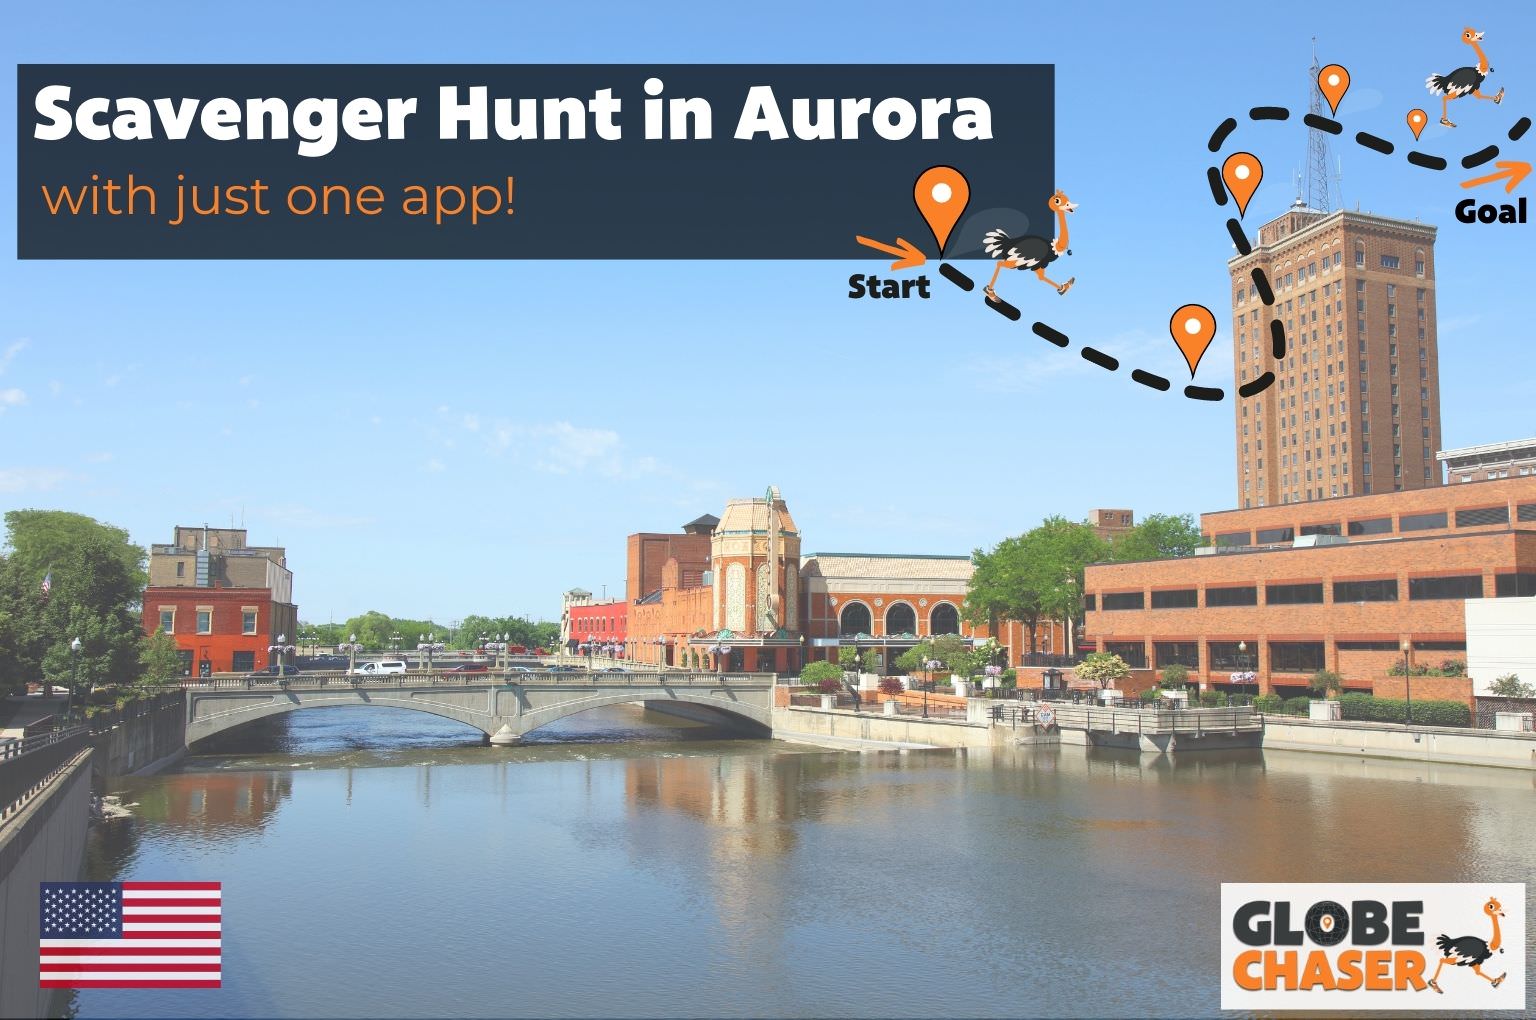 Scavenger Hunt in Aurora, USA - Family Activities with the Globe Chaser App for Outdoor Fun